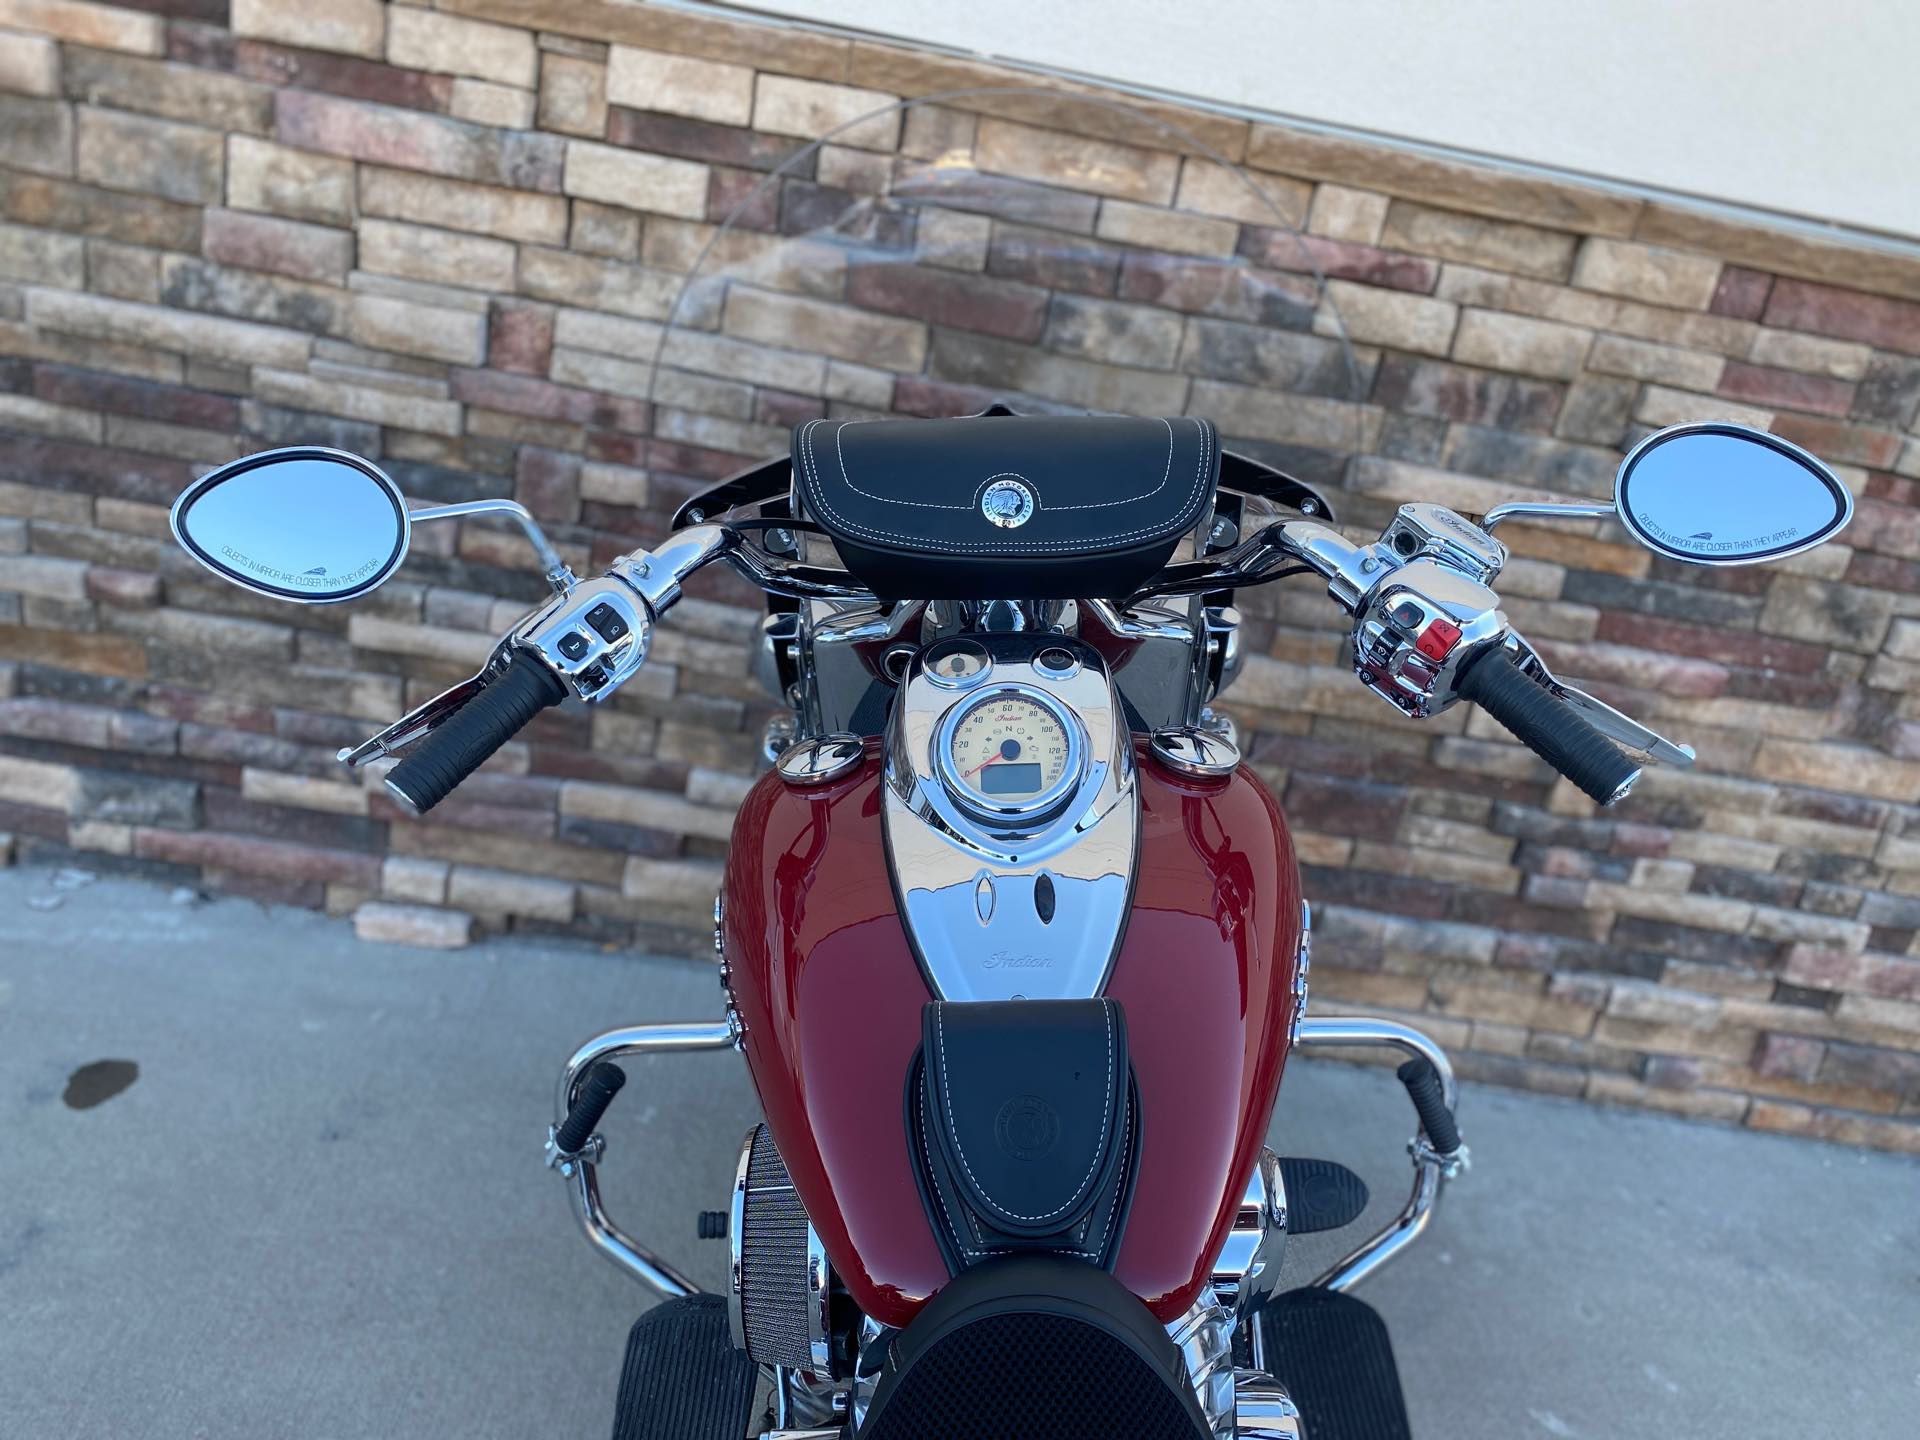 2017 Indian Springfield Base at Head Indian Motorcycle